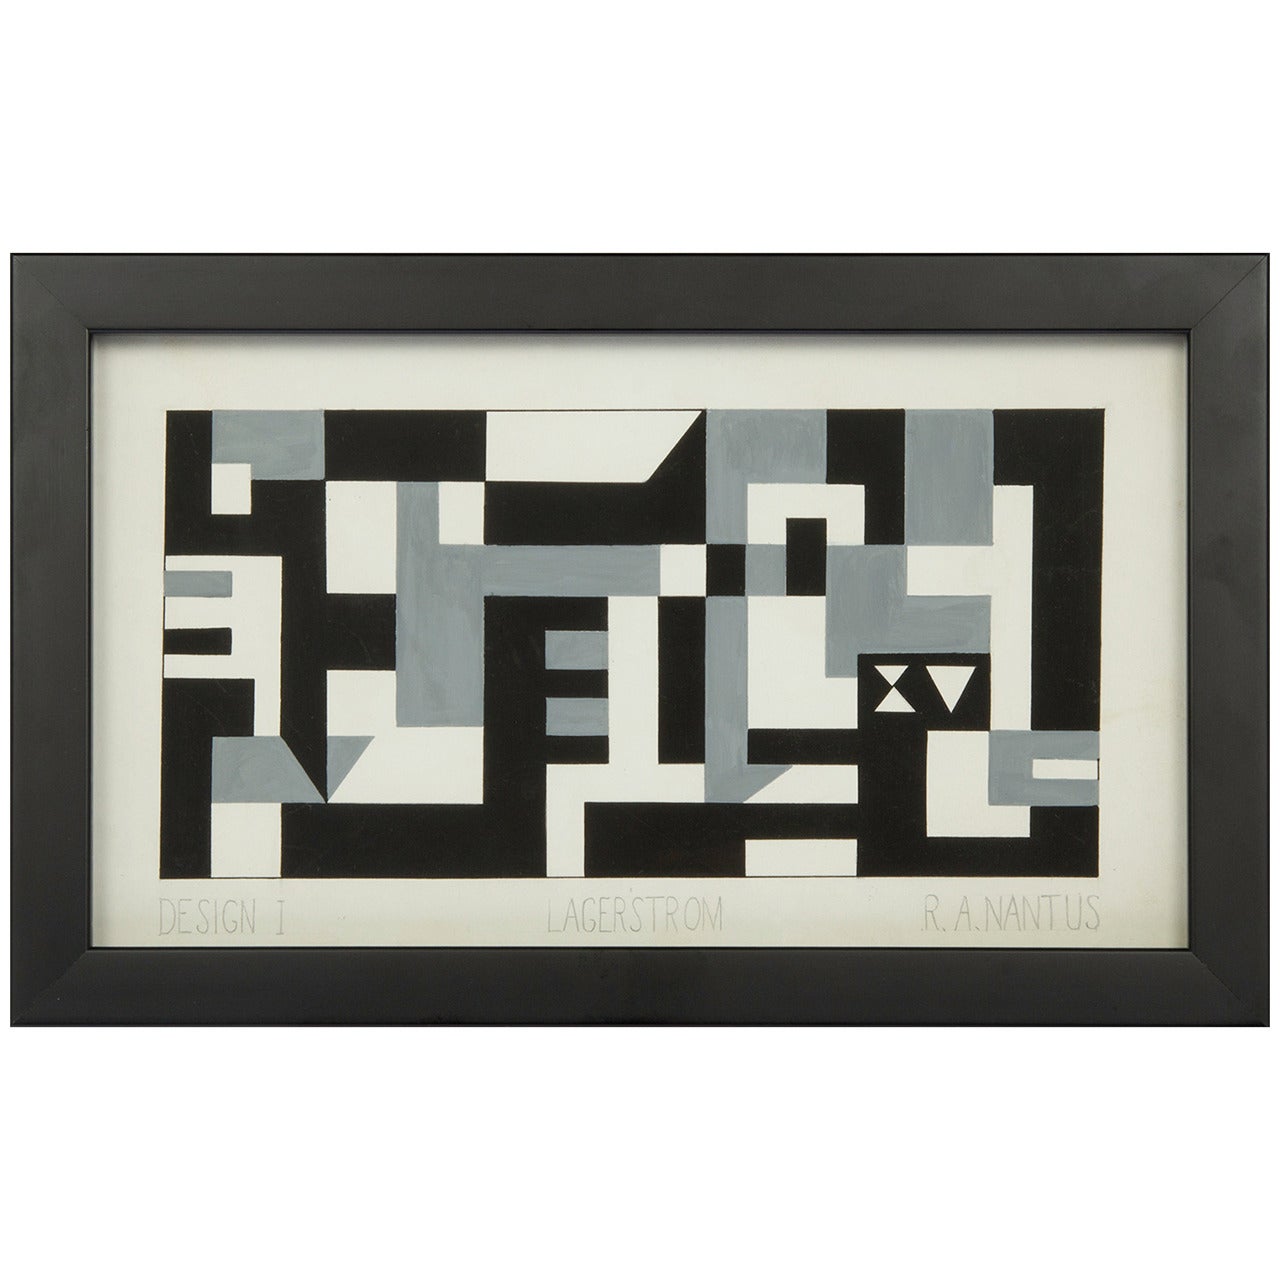 "Design" Cubist Painting by Lagerstrom For Sale